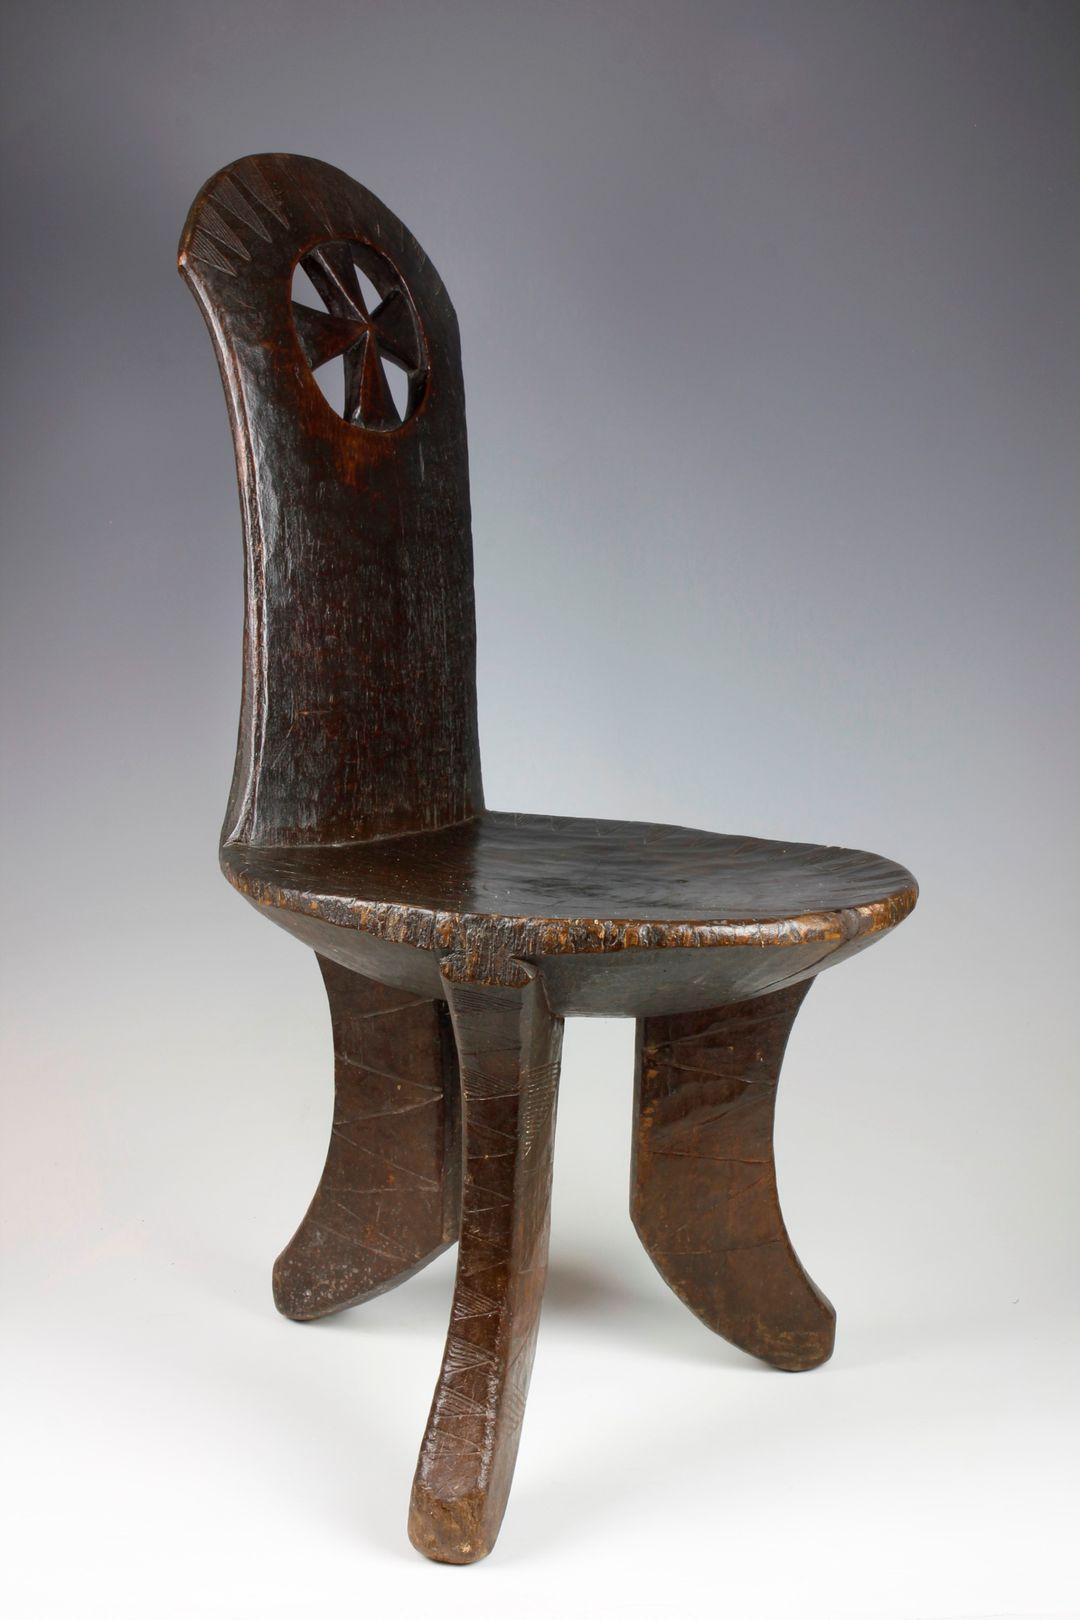 Tribal Late 19th Century/Early 20th Century High-Backed Ethiopian Chair For Sale